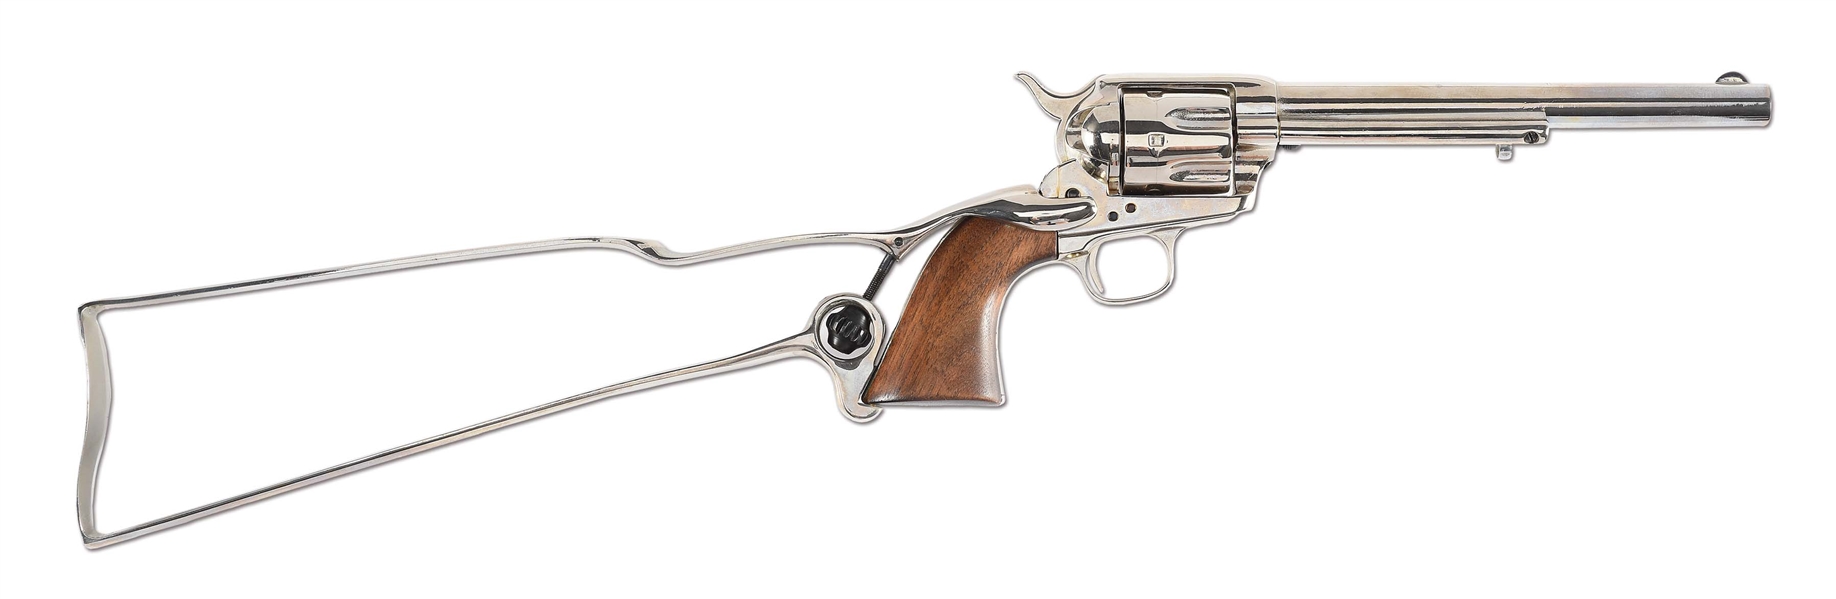 (A) ANTIQUE COLT .44 CALIBER SINGLE ACTION ARMY REVOLVER WITH METAL SHOULDER STOCK (1878).